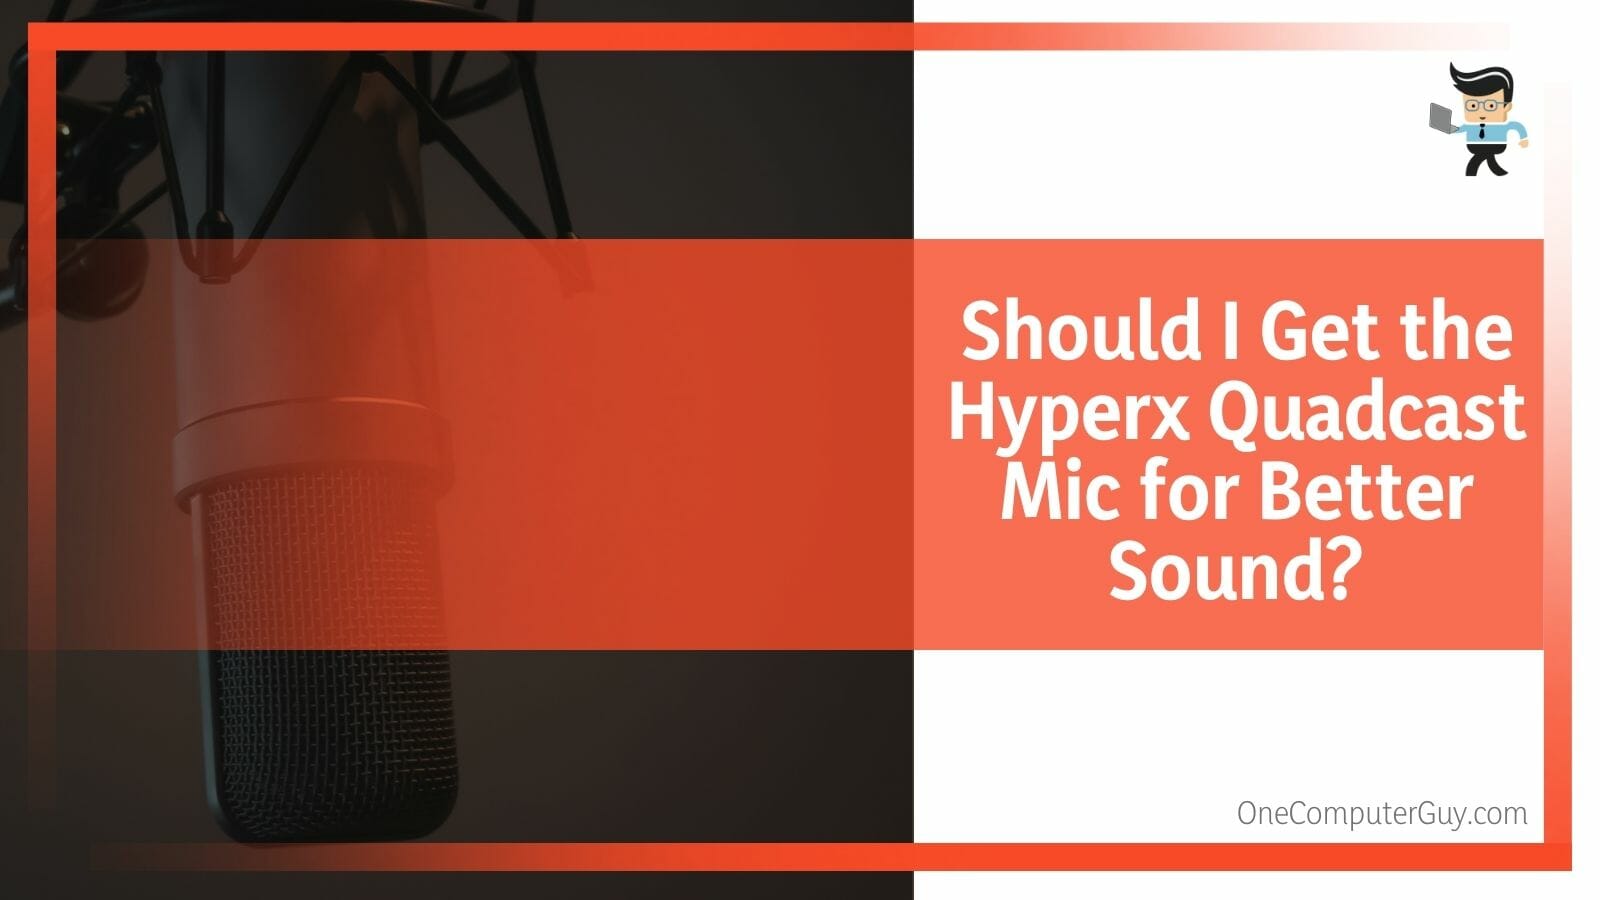 Should I Get the Hyperx Quadcast Mic for Better Sound